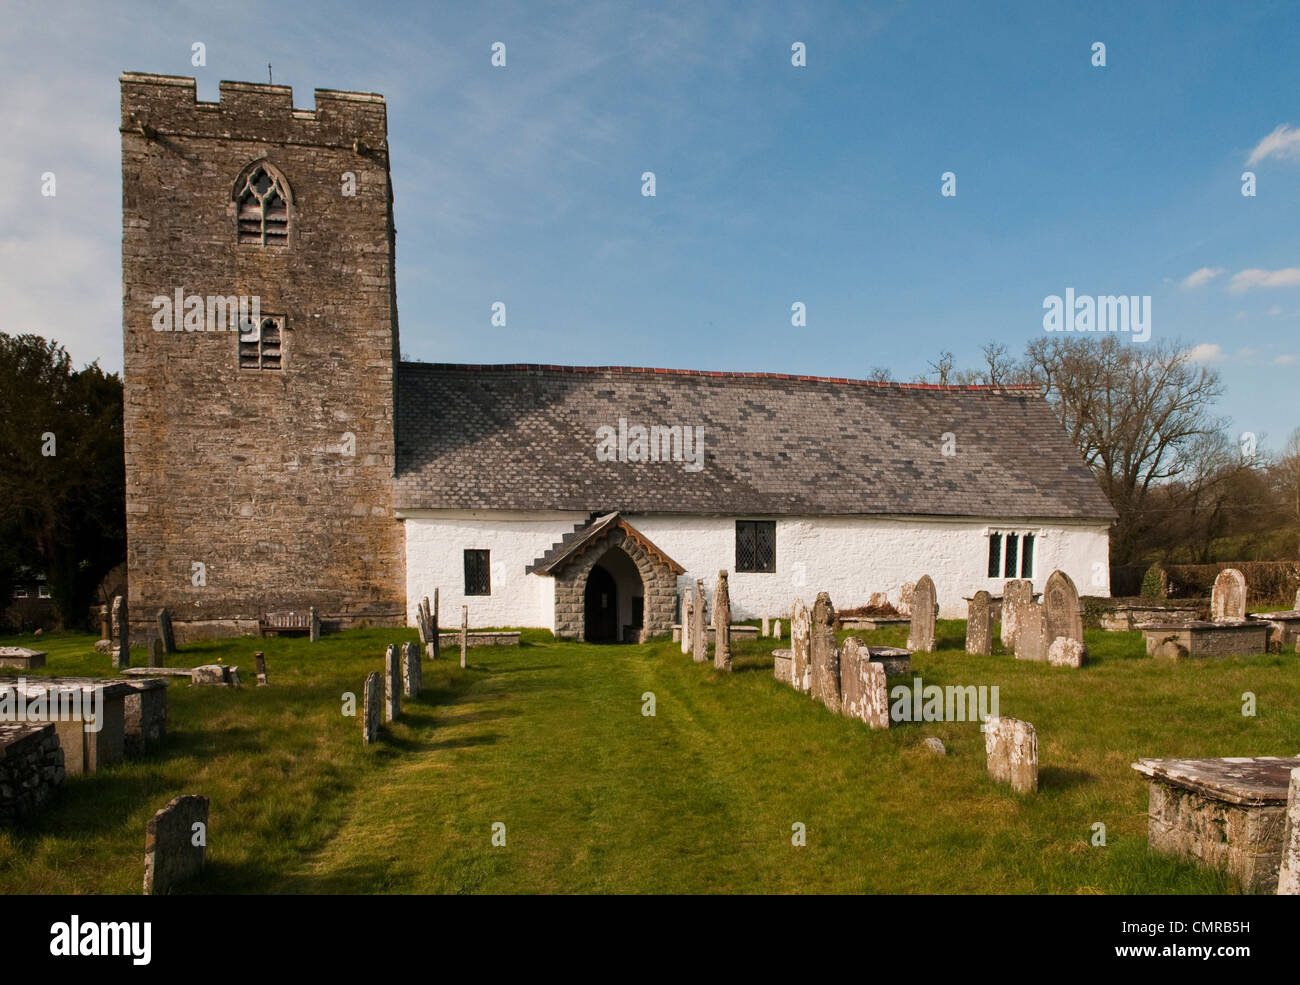 Disserth Parish Church, a very old church with an interior that has hardly changed for hundreds of years near Llandrindod Wells. Stock Photo